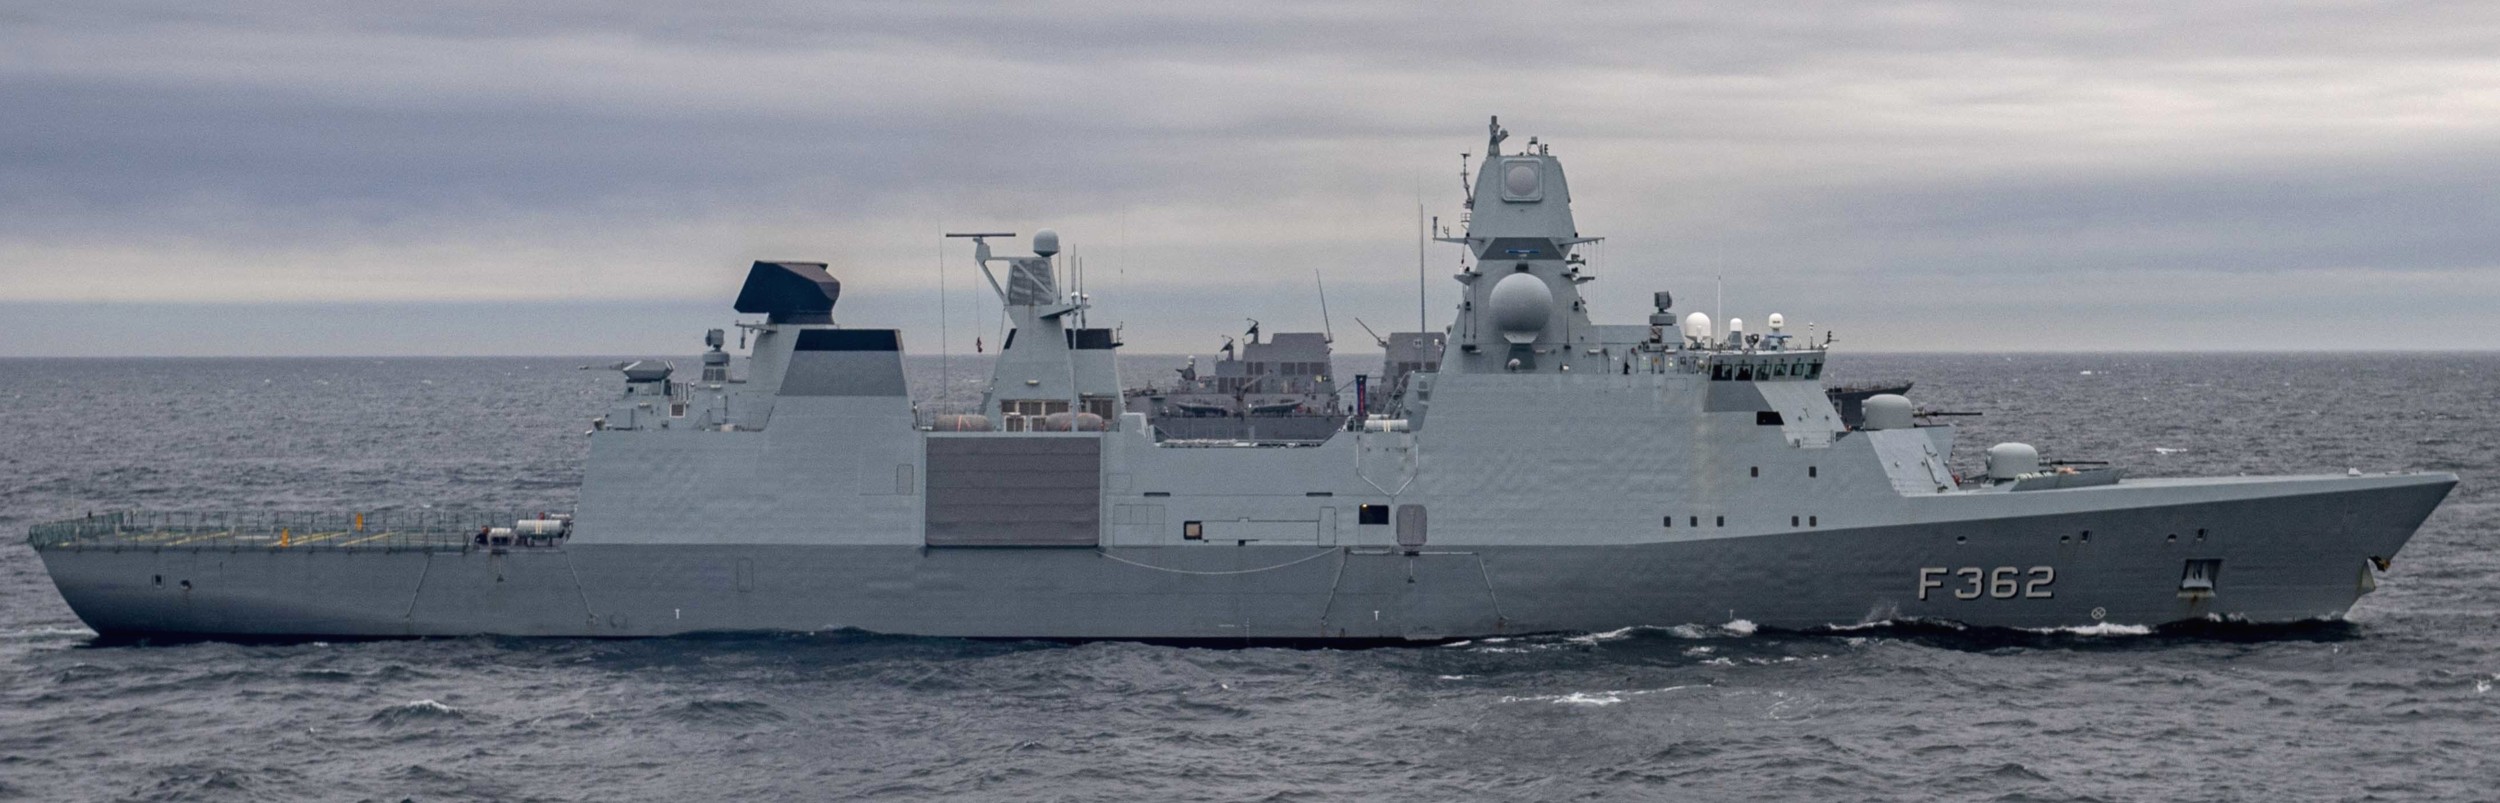 f-362 hdms peter willemoes iver huitfeldt class guided missile frigate ffg royal danish navy 17